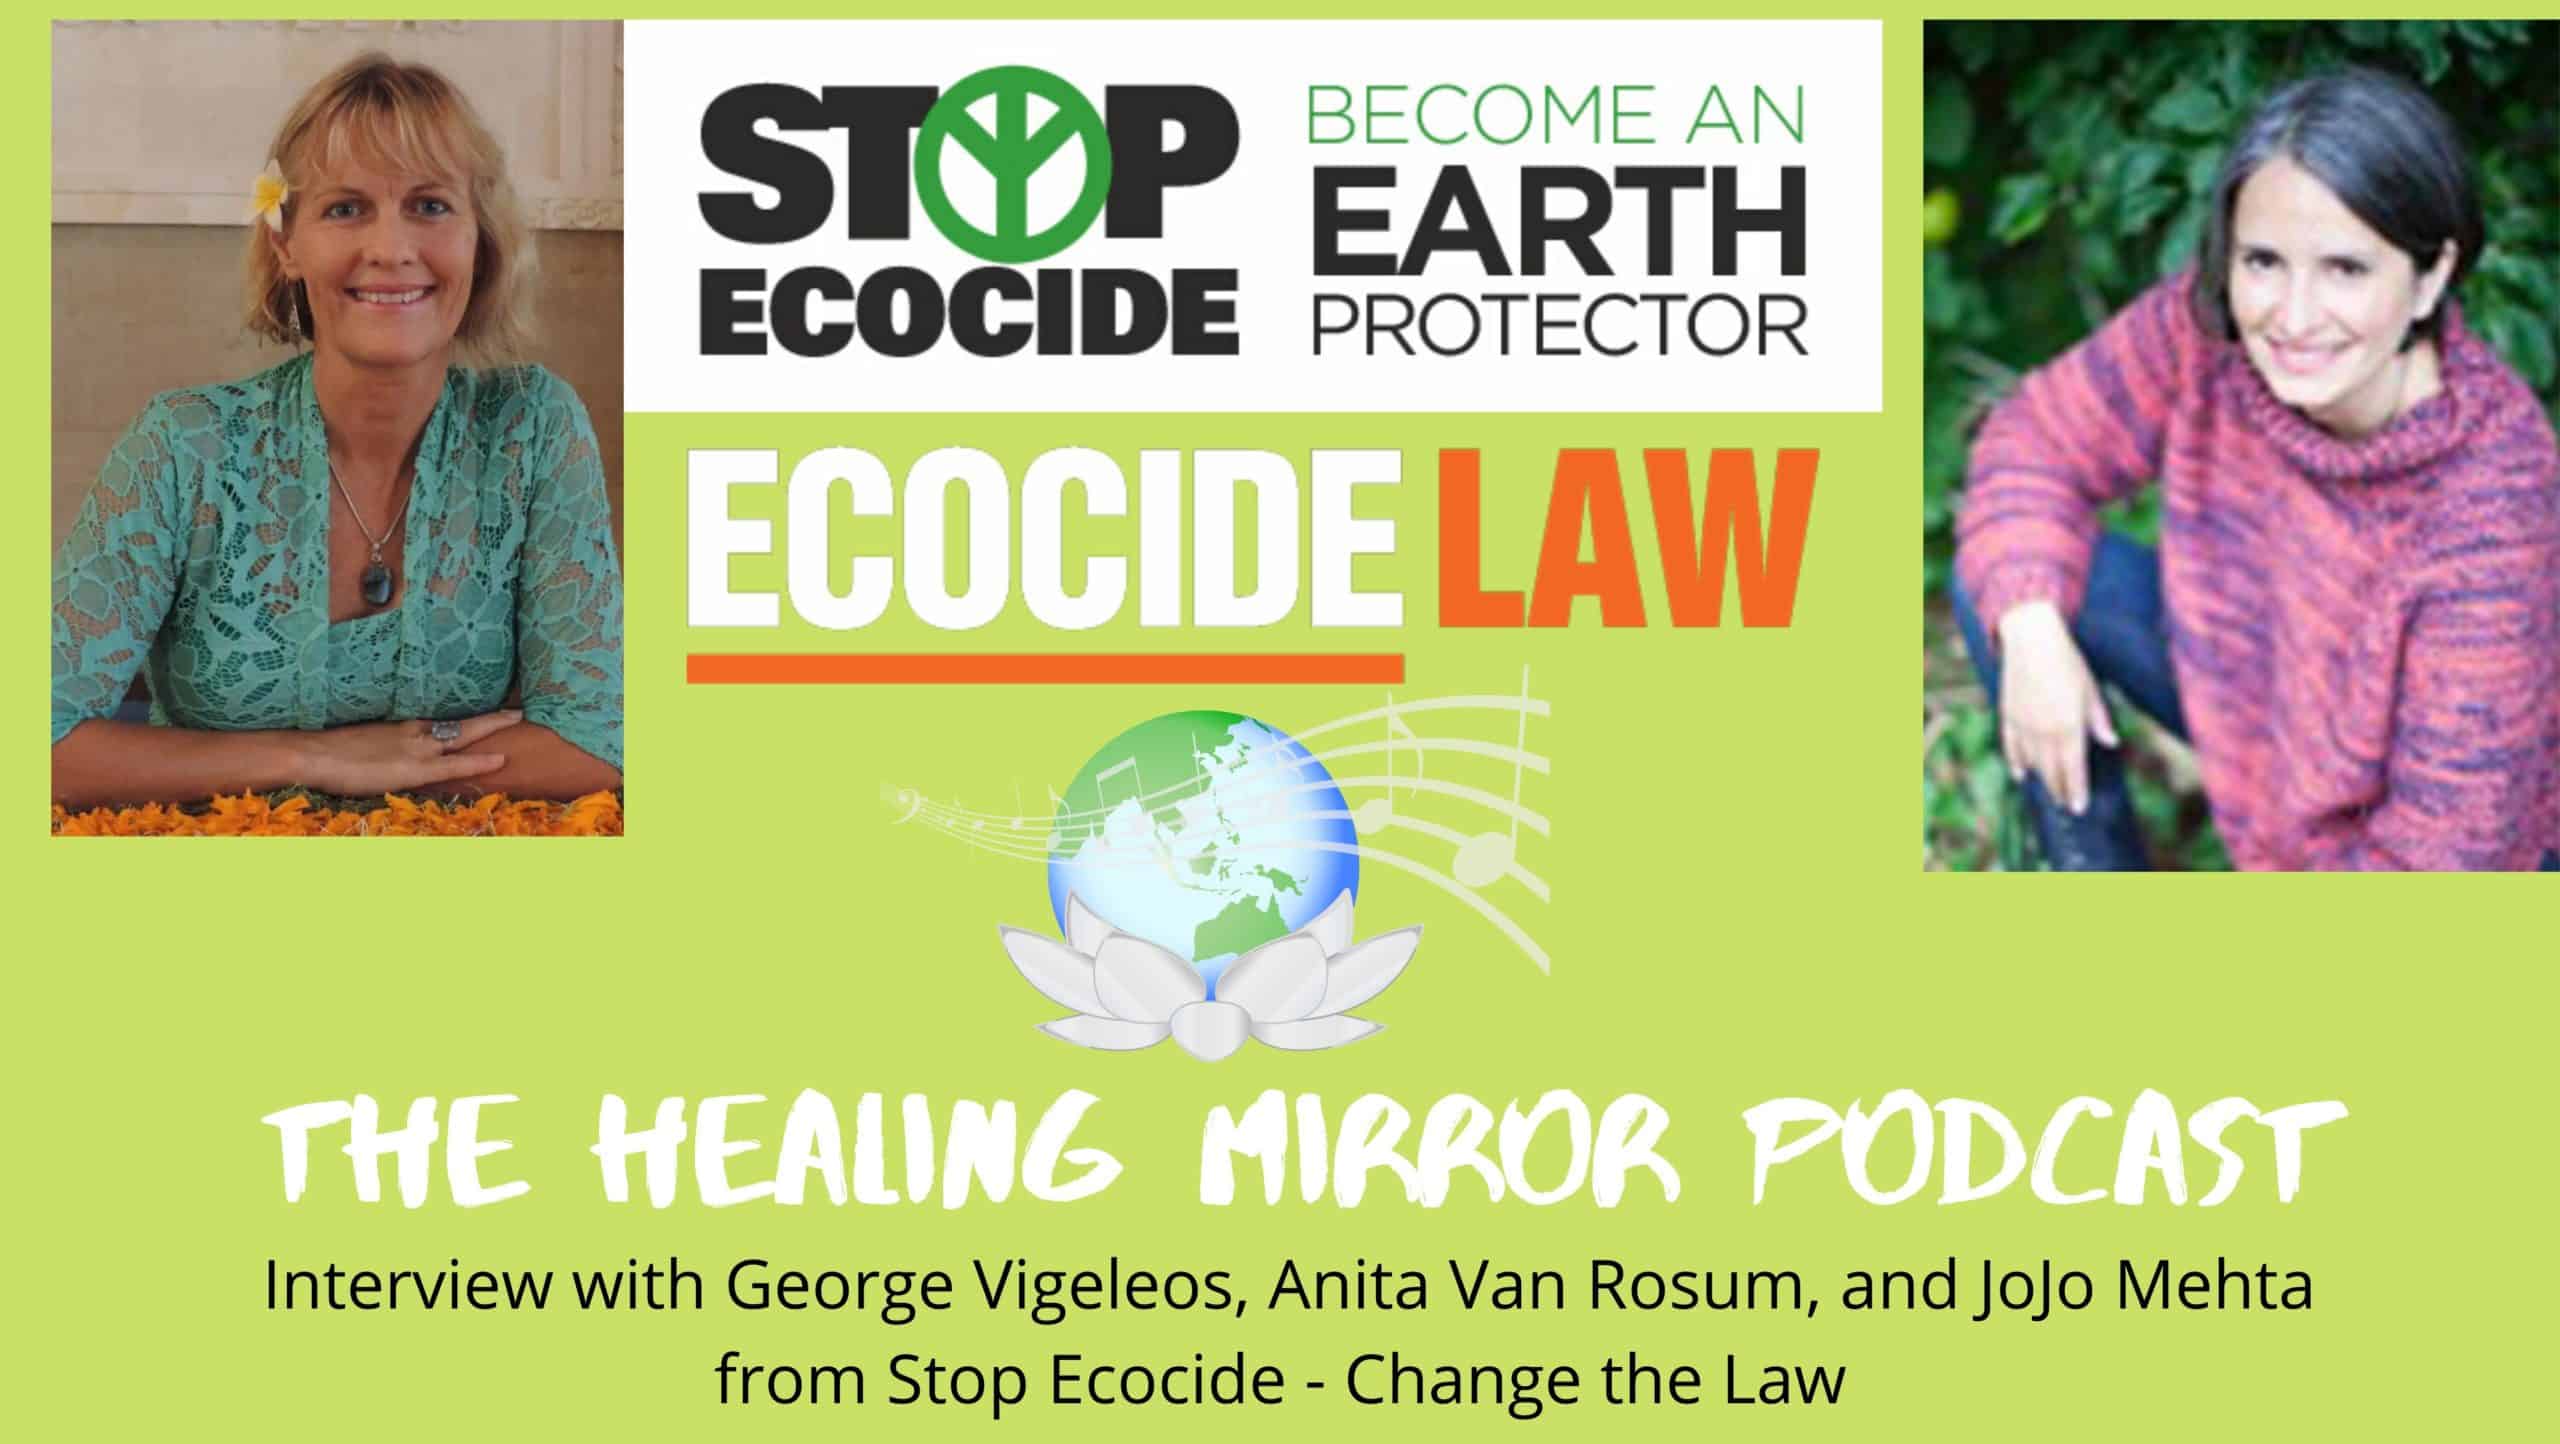 Stop Ecocide Change the Law Save the Earth